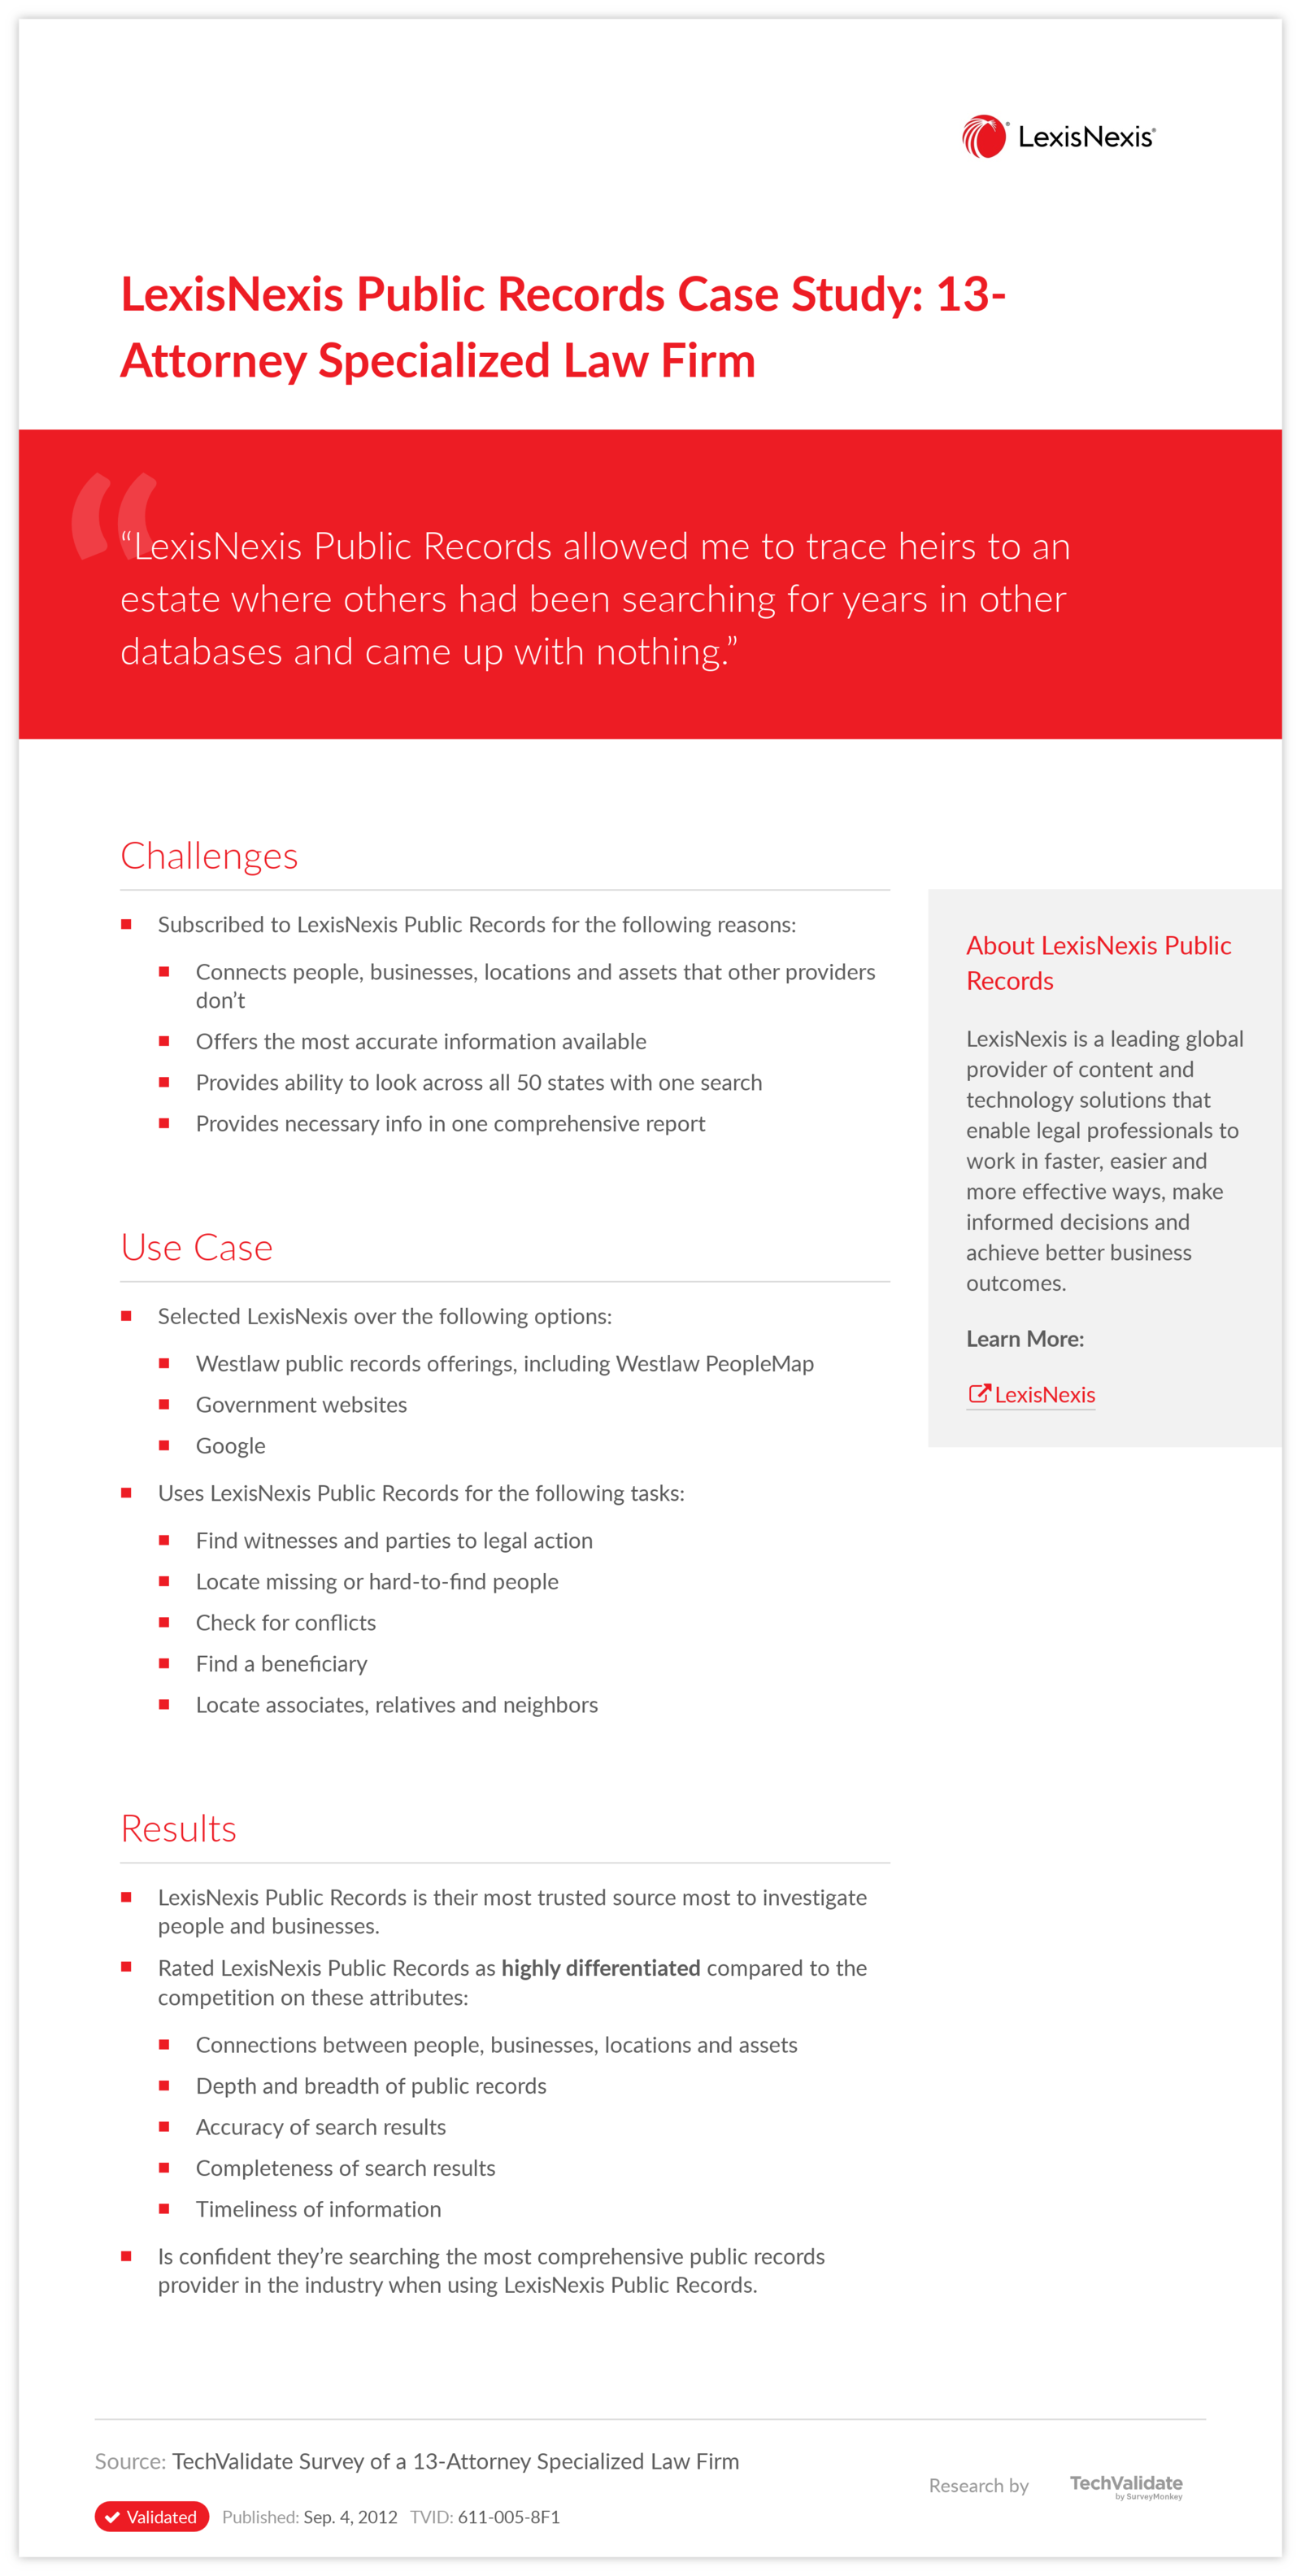 LexisNexis Public Records Case Study: 13-Attorney Specialized Law Firm